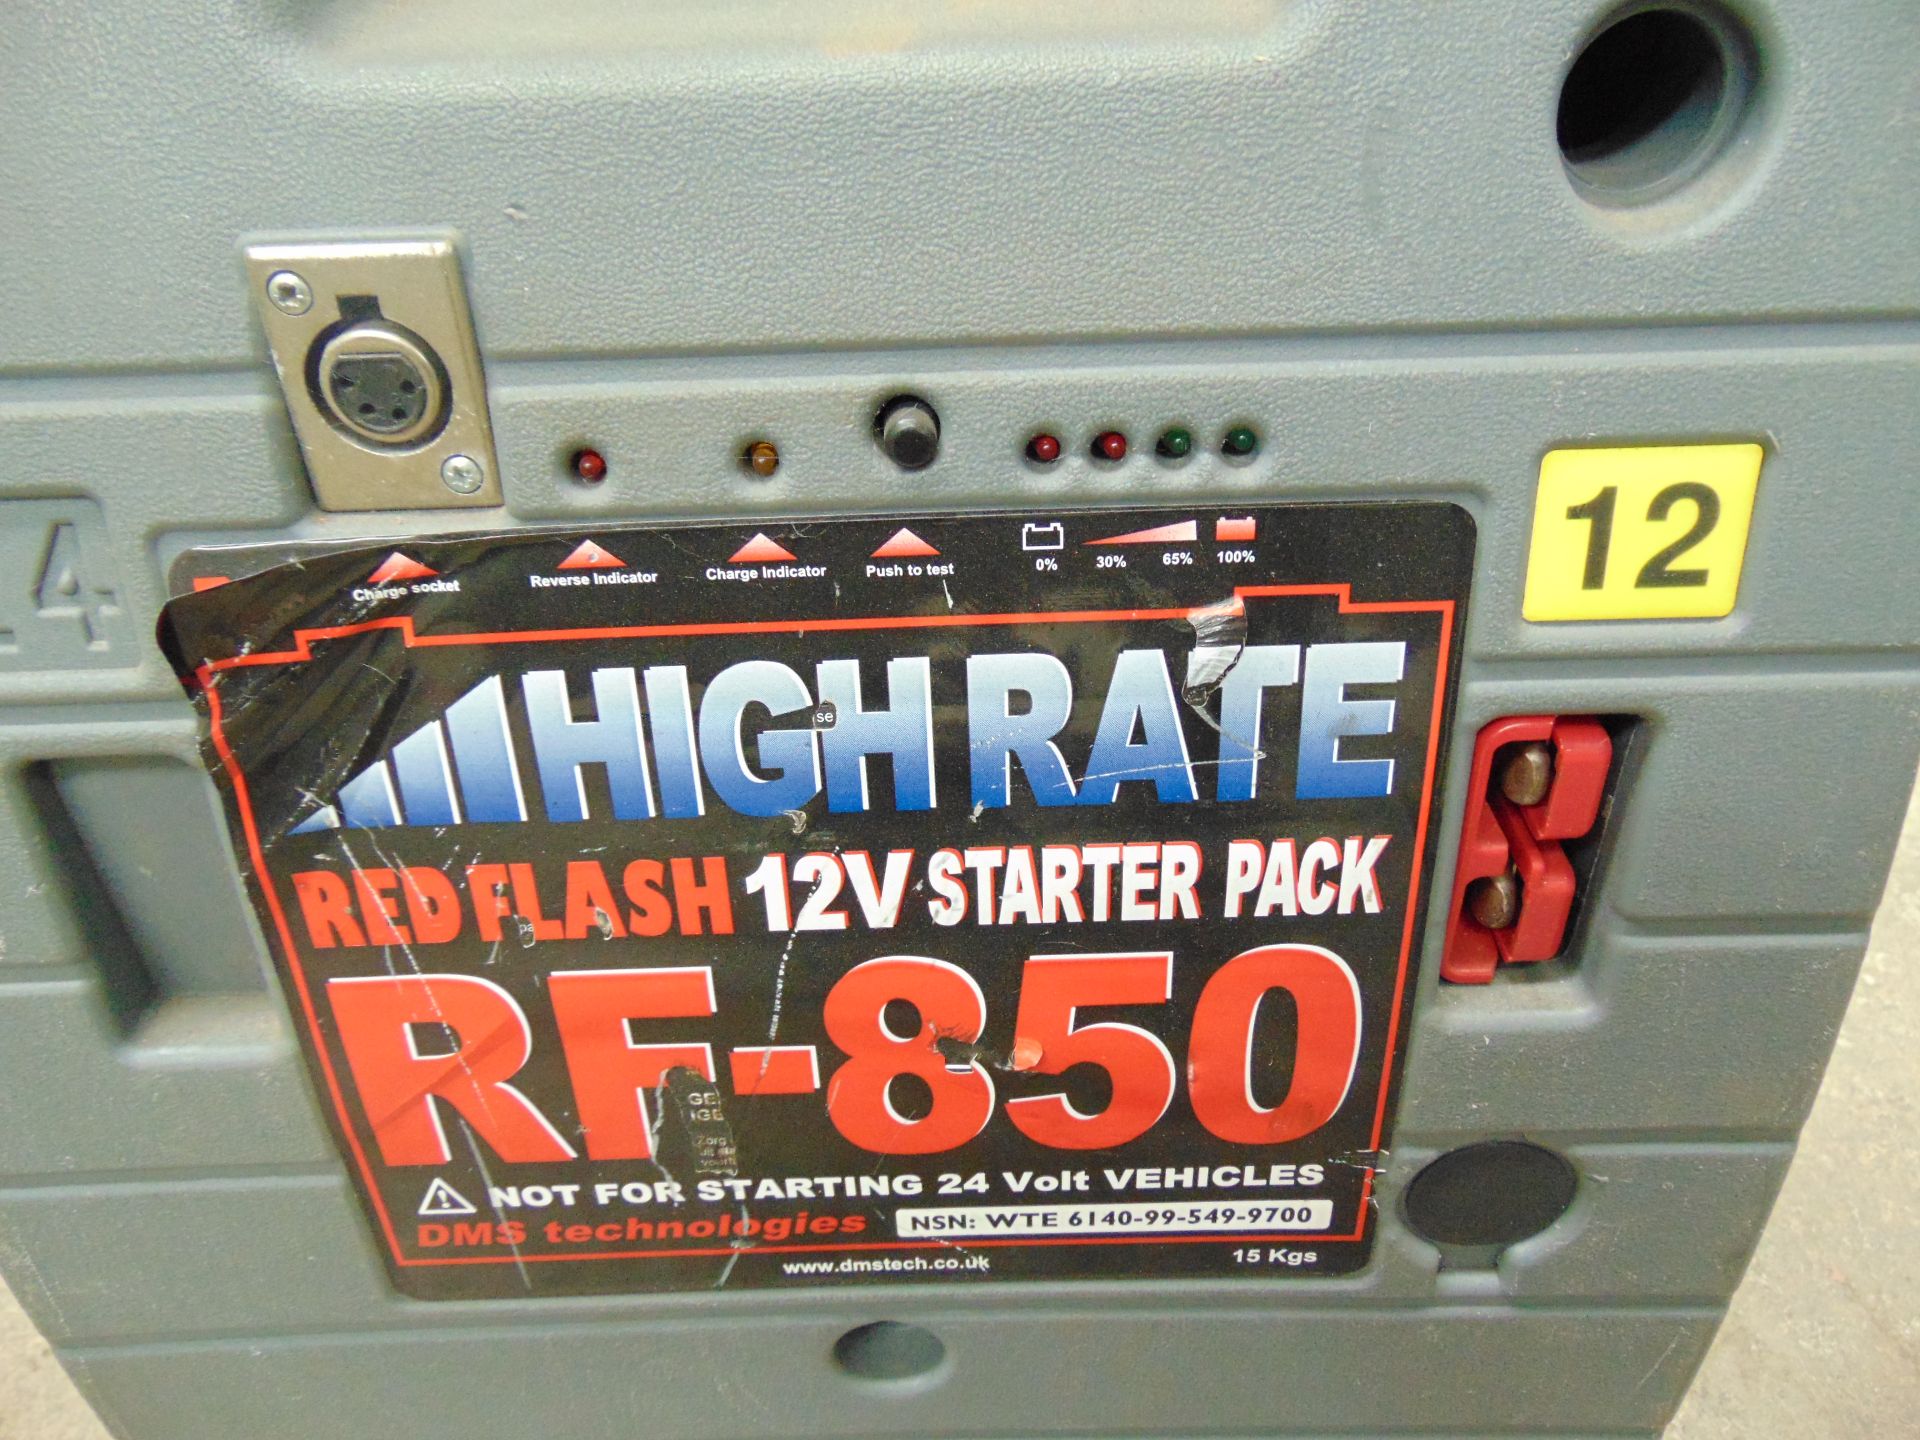 High Rate RF-850 12V Battery Pack - Image 3 of 3